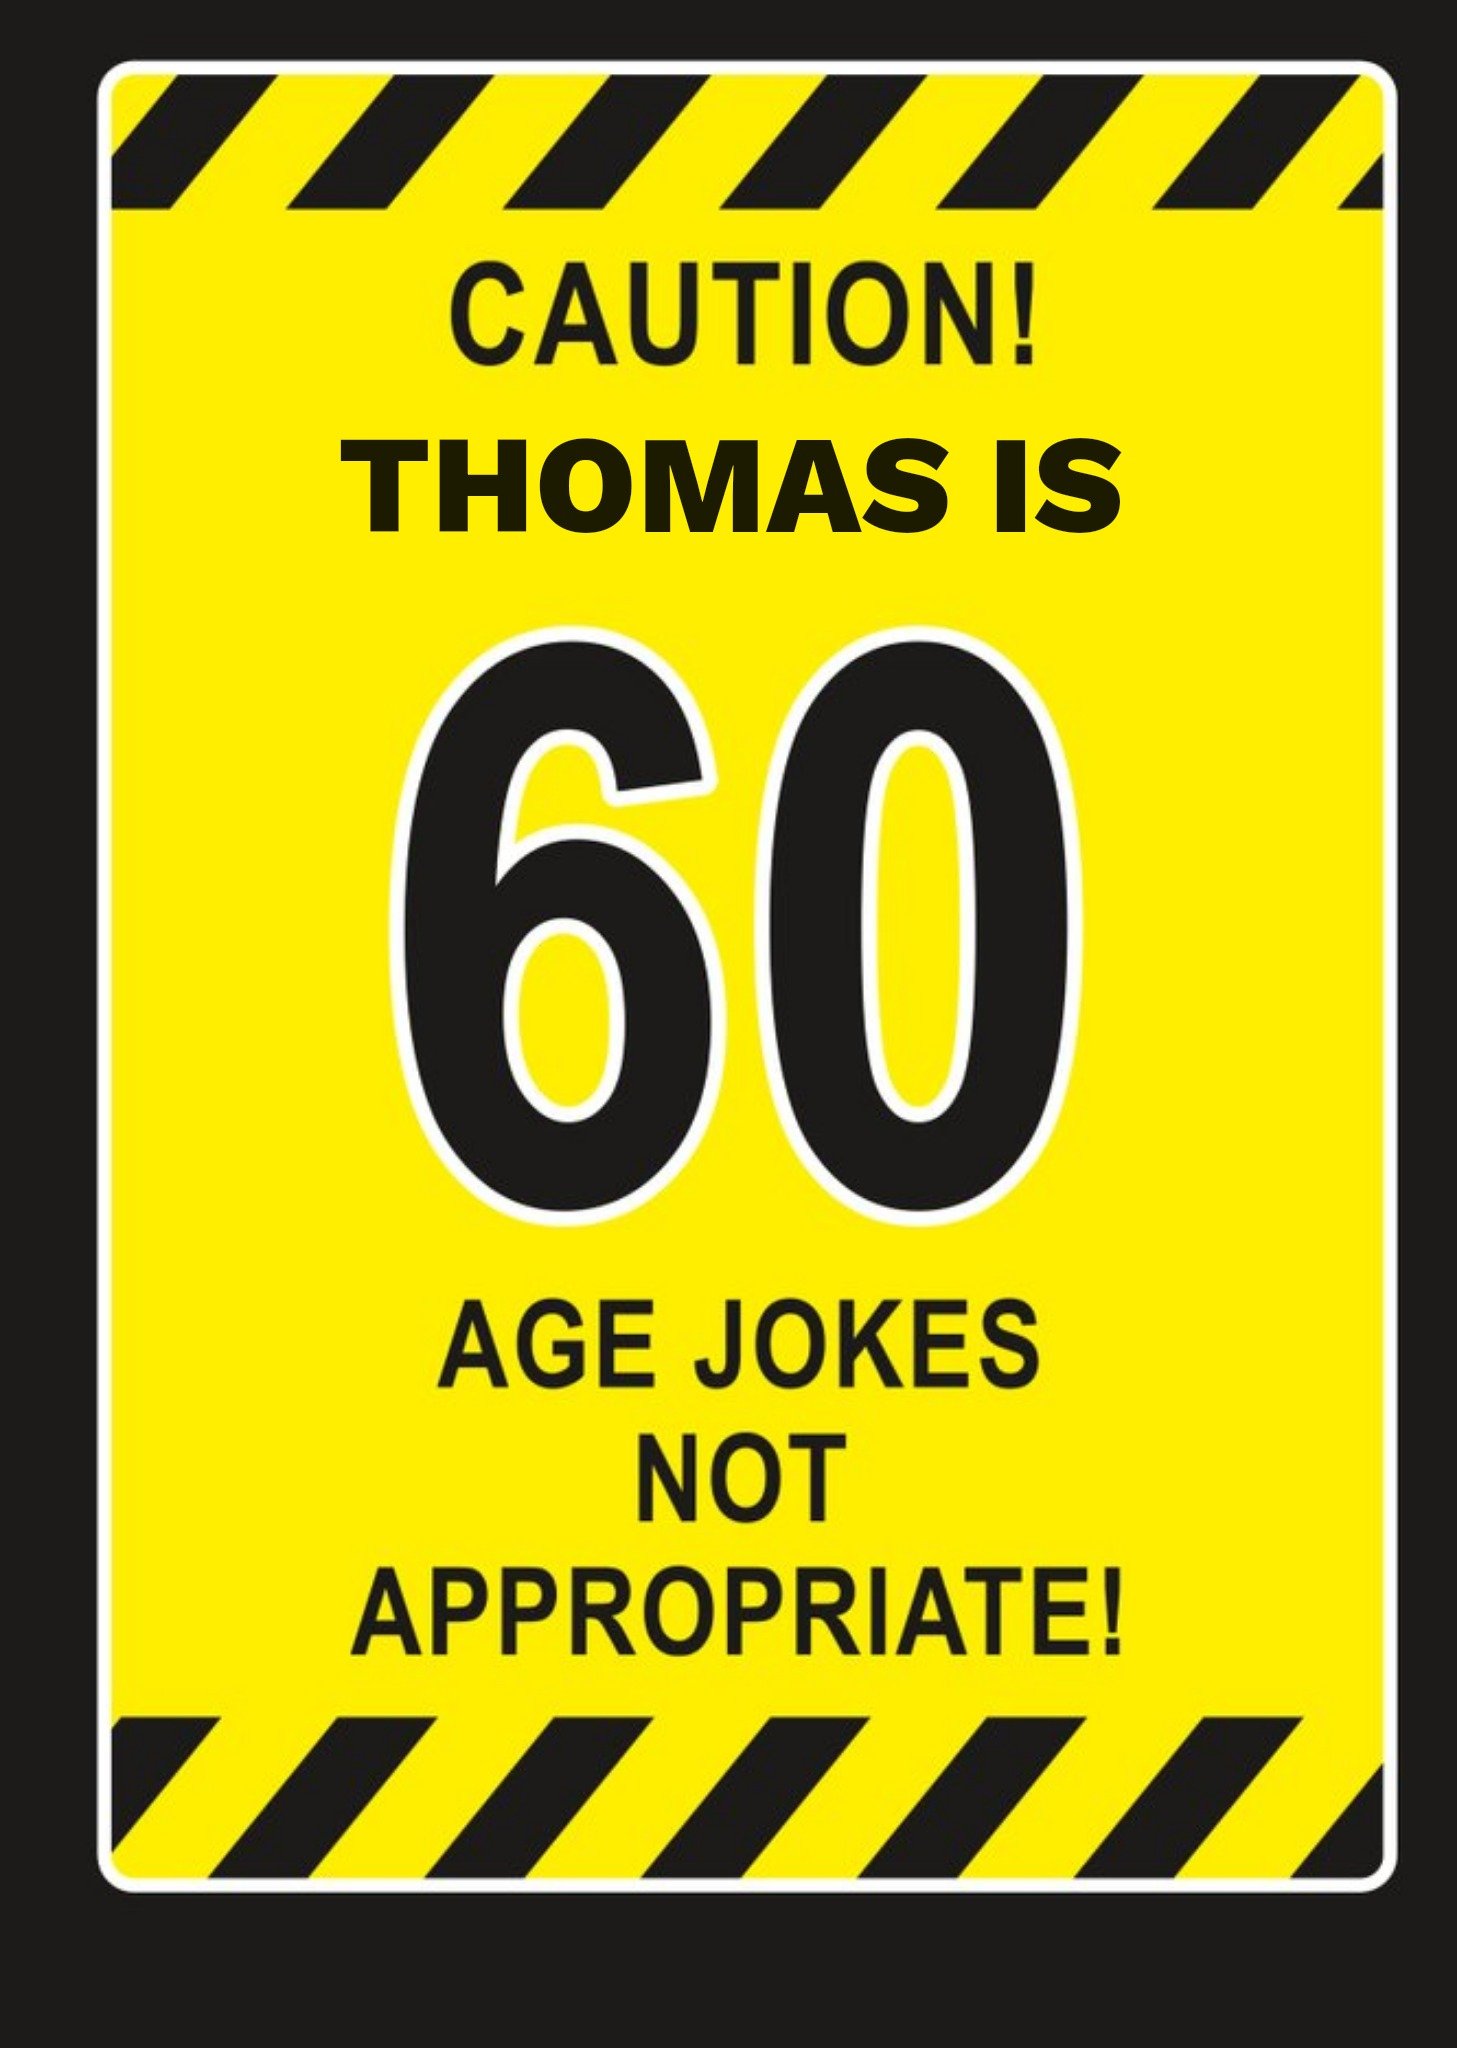 Moonpig Caution Age Jokes Not Appropriate 60th Birthday Card, Large